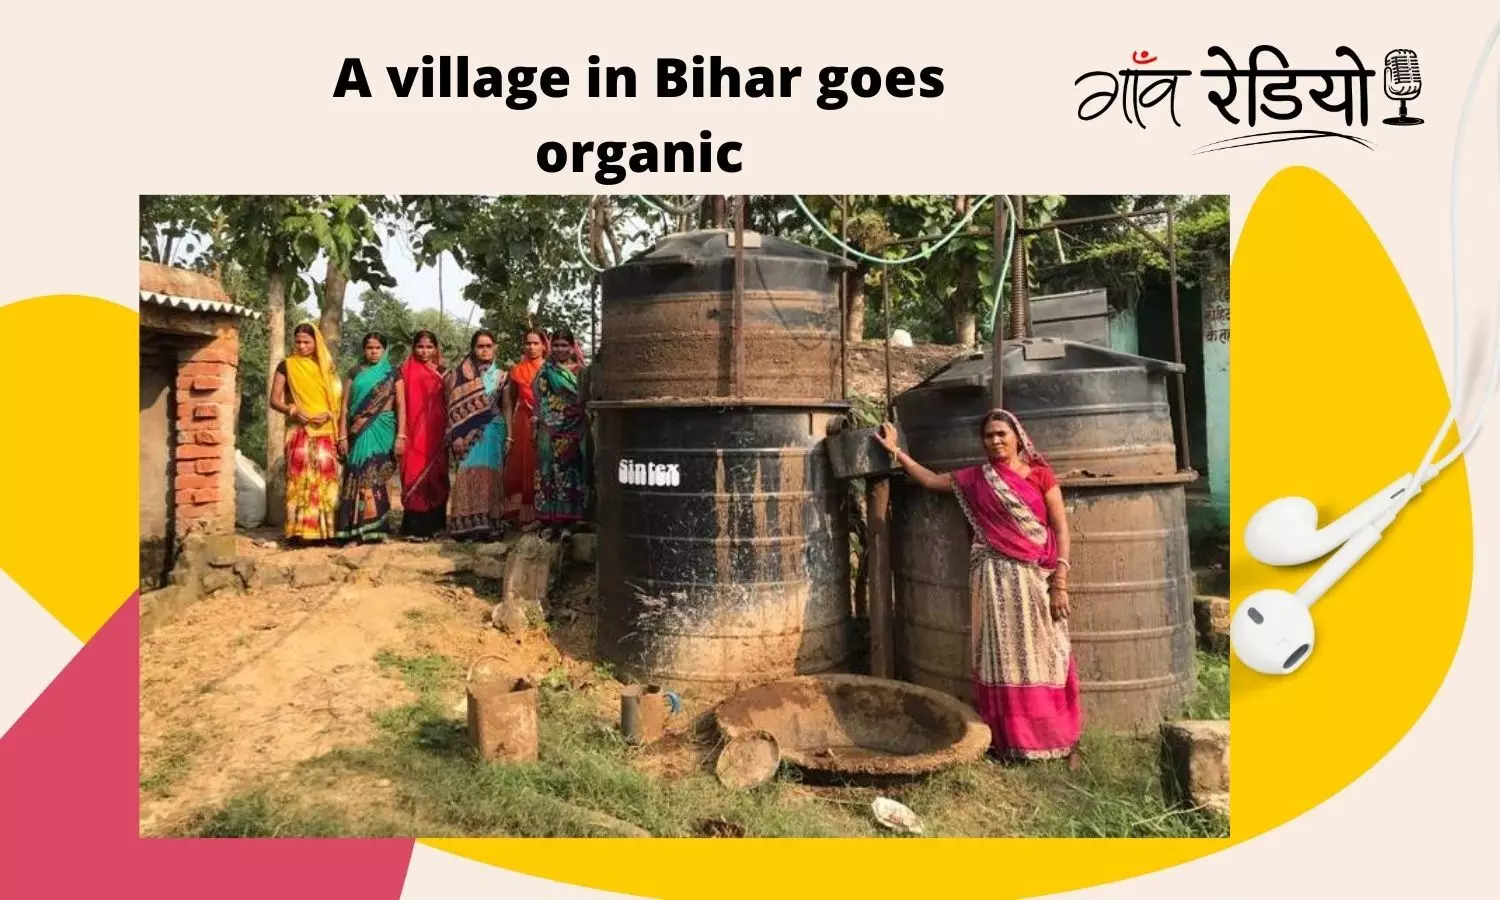 Gaon Radio: Tune in to the story of a village in Bihar going organic, transforming the lives of its women